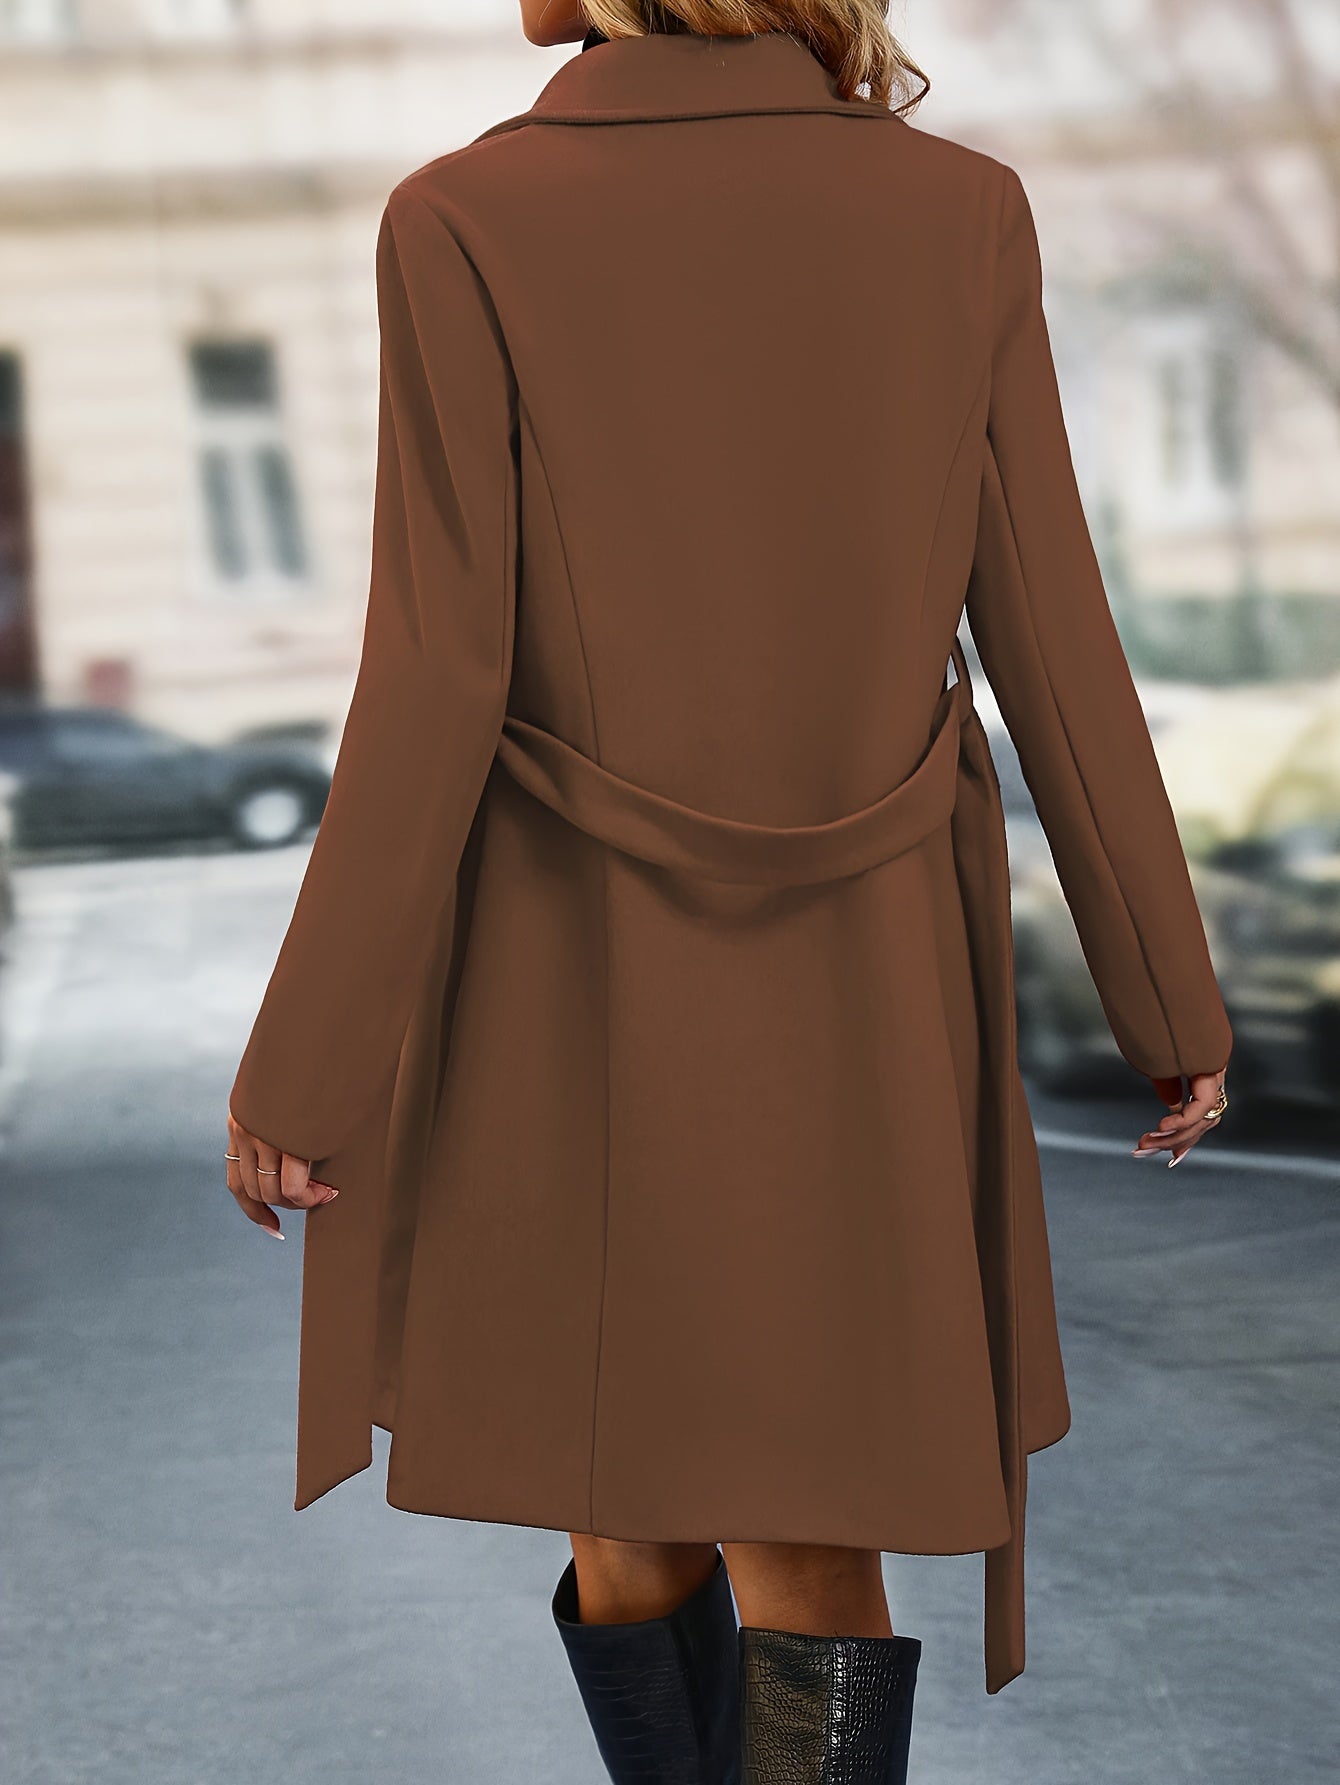 Elegant Women's Trench Coats" and "Stylish Women's Trench Coats - CasualFlowshop